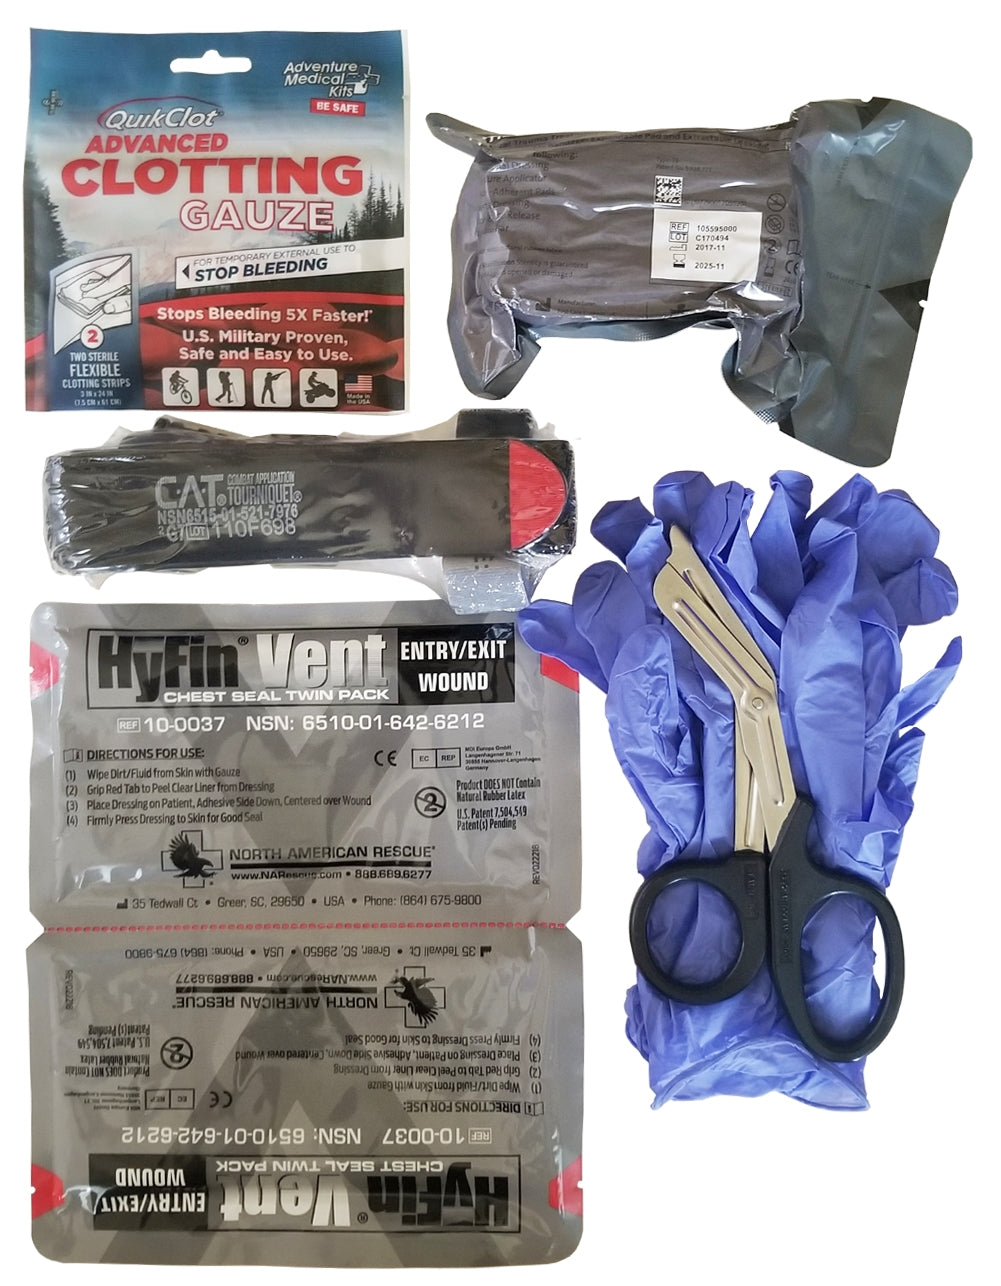 Best Glide ASE - Serious Survival Kits and Gear - Trusted Since 2002